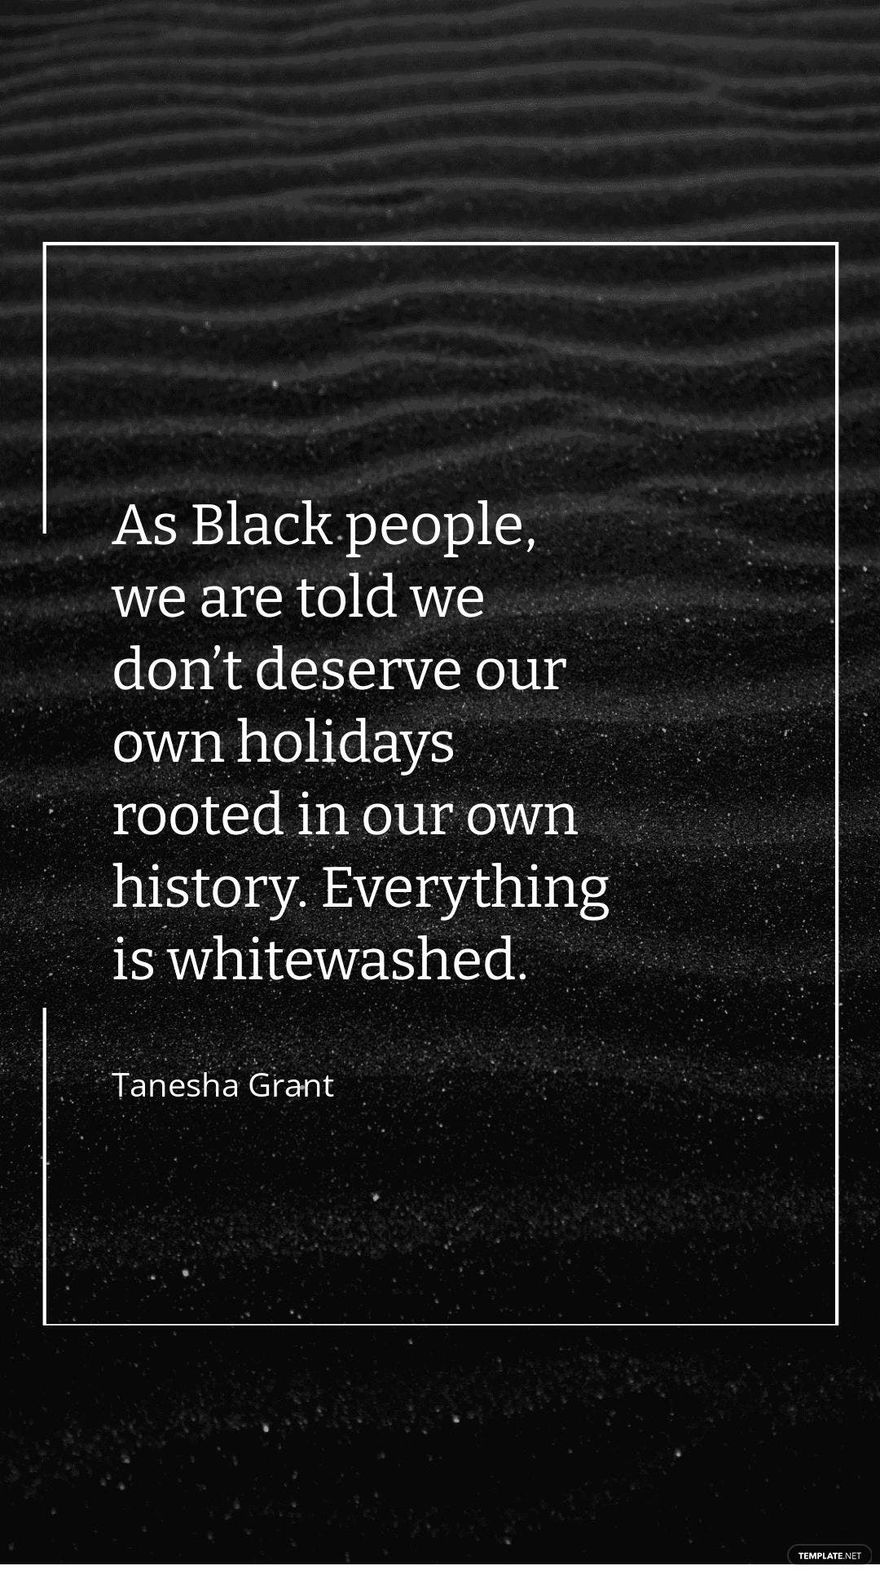 Tanesha Grant - As Black people, we are told we don’t deserve our own holidays rooted in our own history. Everything is whitewashed.